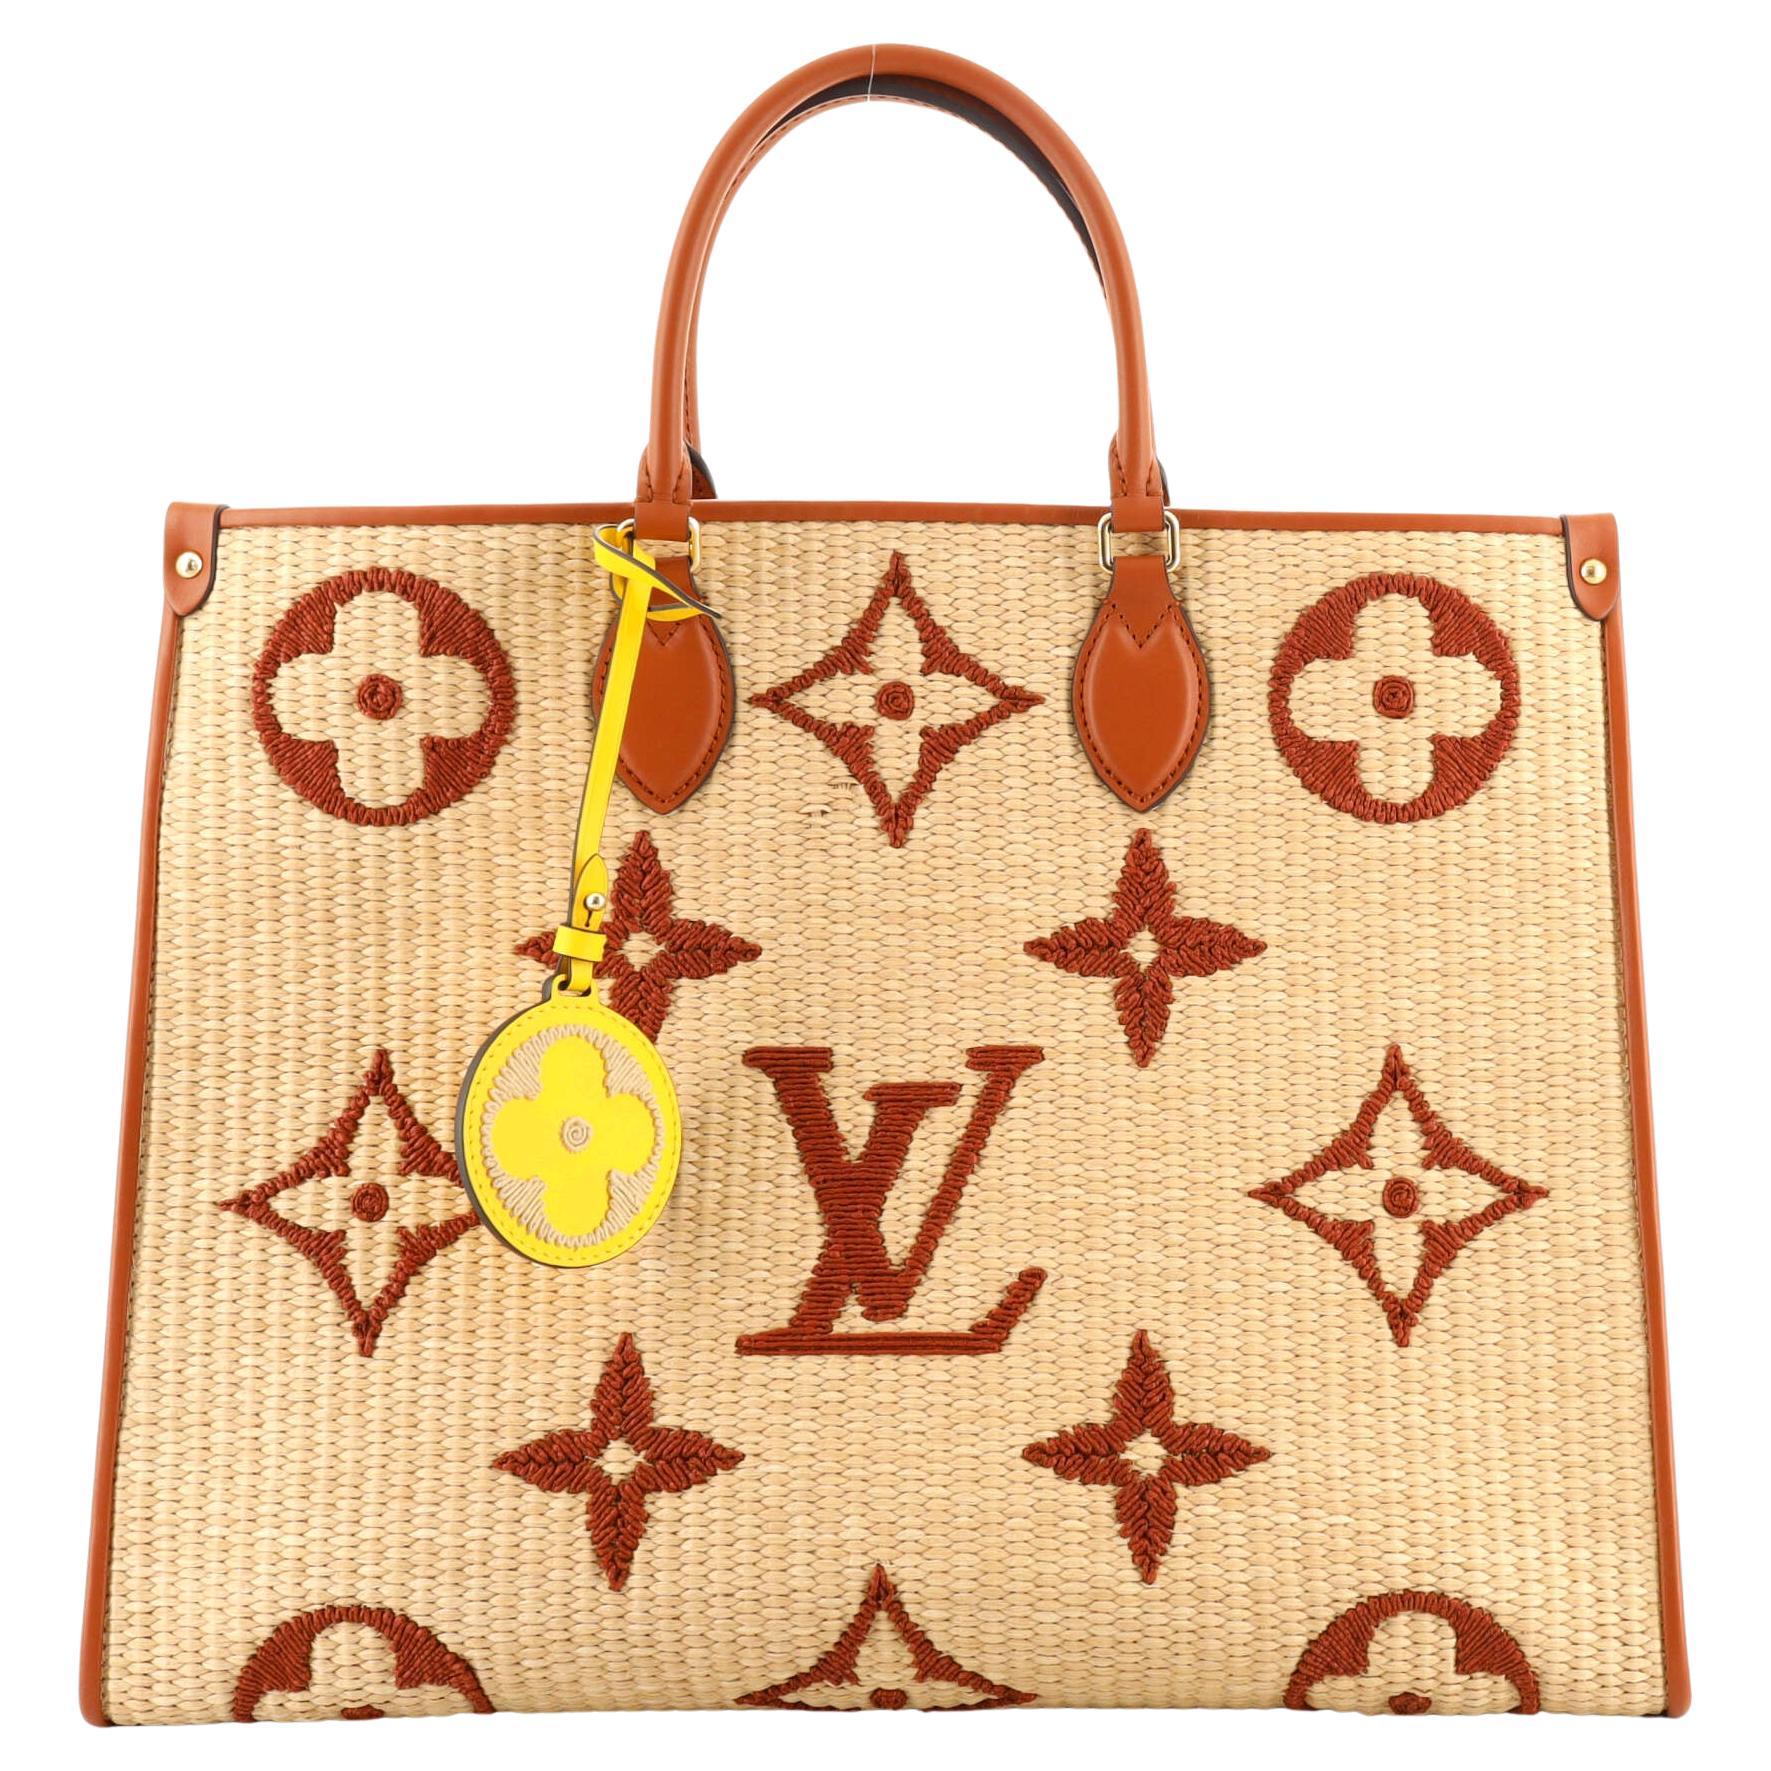 Louis Vuitton Brand New OnTheGo GM Tote Bag-Miami Resort 2021 Collection  Limited